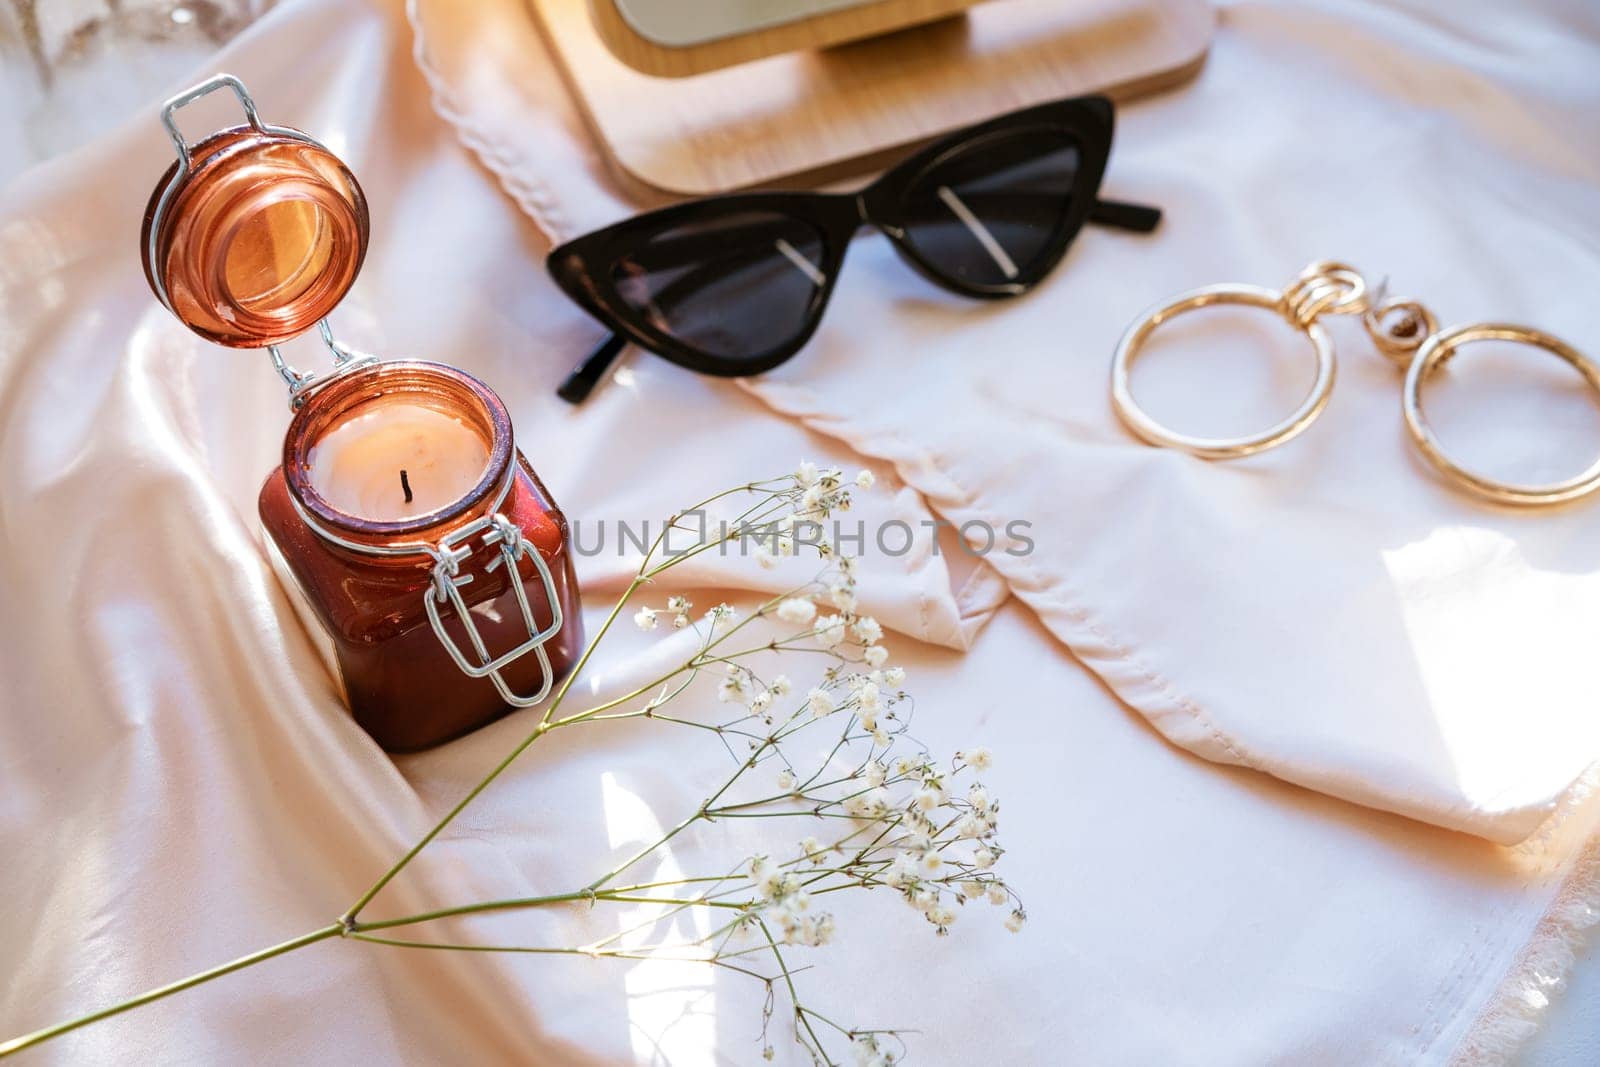 there is a decorative candle in a jar and glasses on the fabric by EkaterinaPereslavtseva